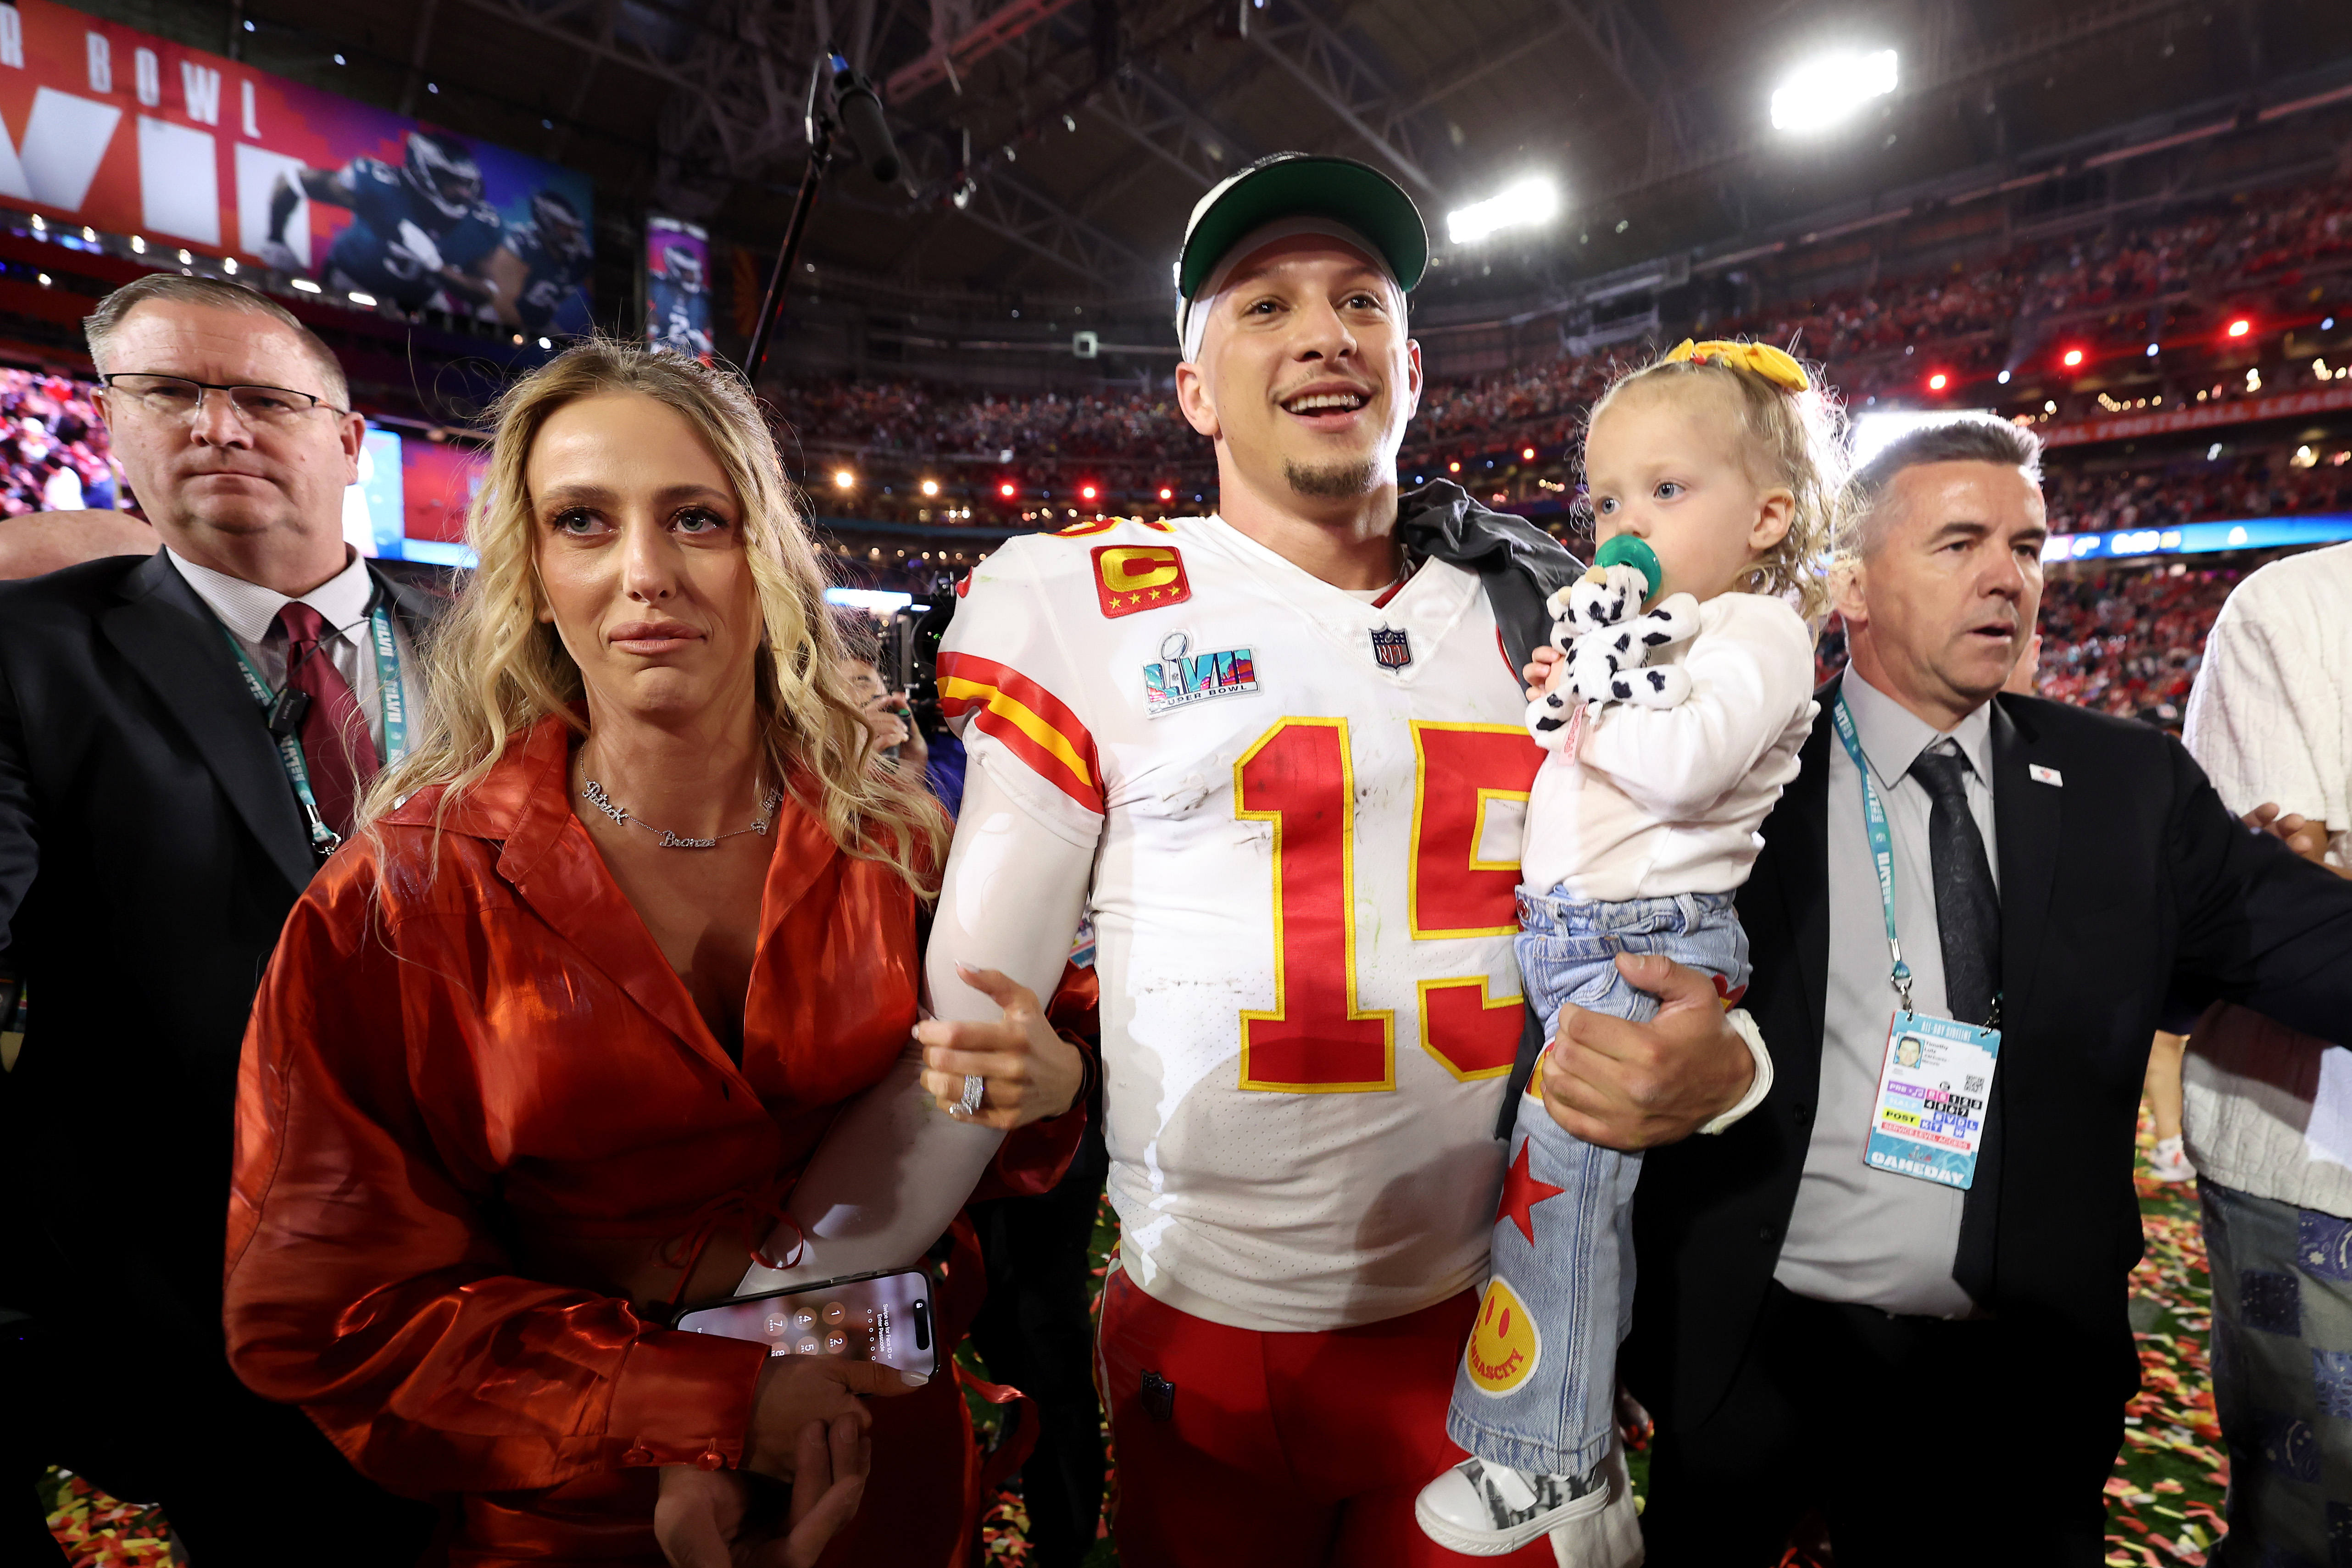 Brittany watched Patrick Mahomes win the Super Bowl last month